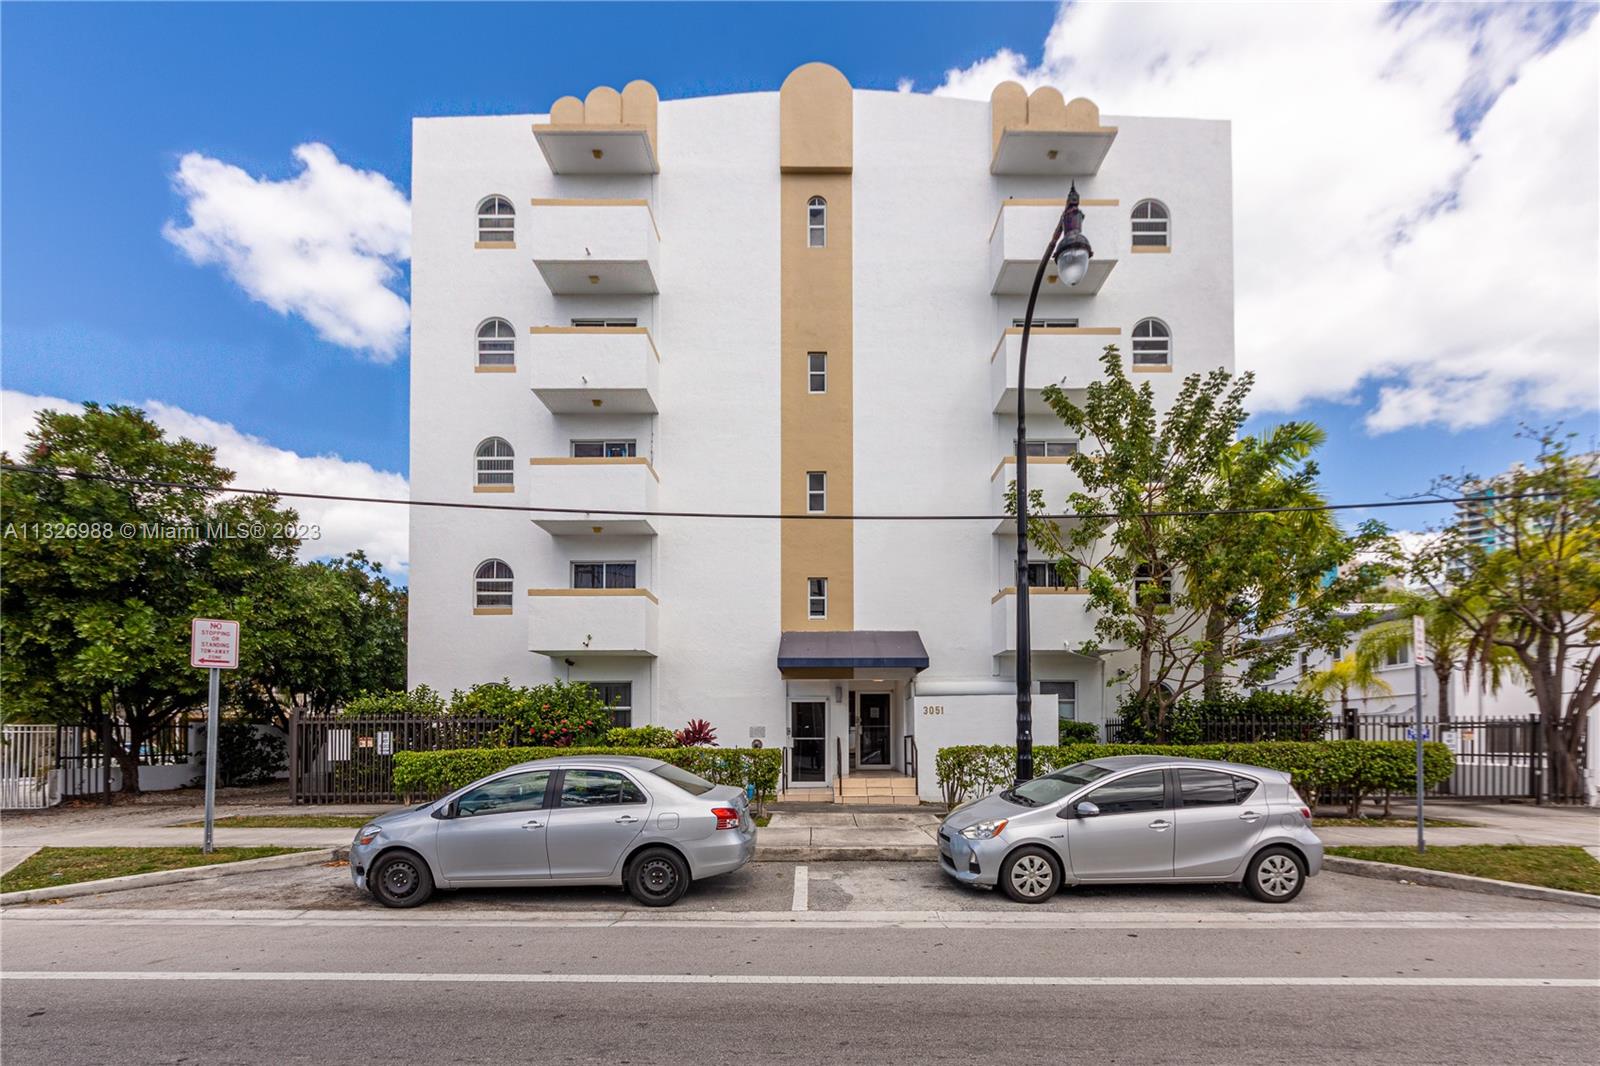 Live the Coconut Grove Lifestyle in this cozy 2BR/2BA unit at Grove Palms II. Porcelanato floors throughout, in- unit washer & dryer and private balcony overlooking the grove. The building is walking distance to Bayfront, parks, marinas, shoppings malls, restaurants and more. Secure building, 1 gated assigned parking spaces and guest parking.